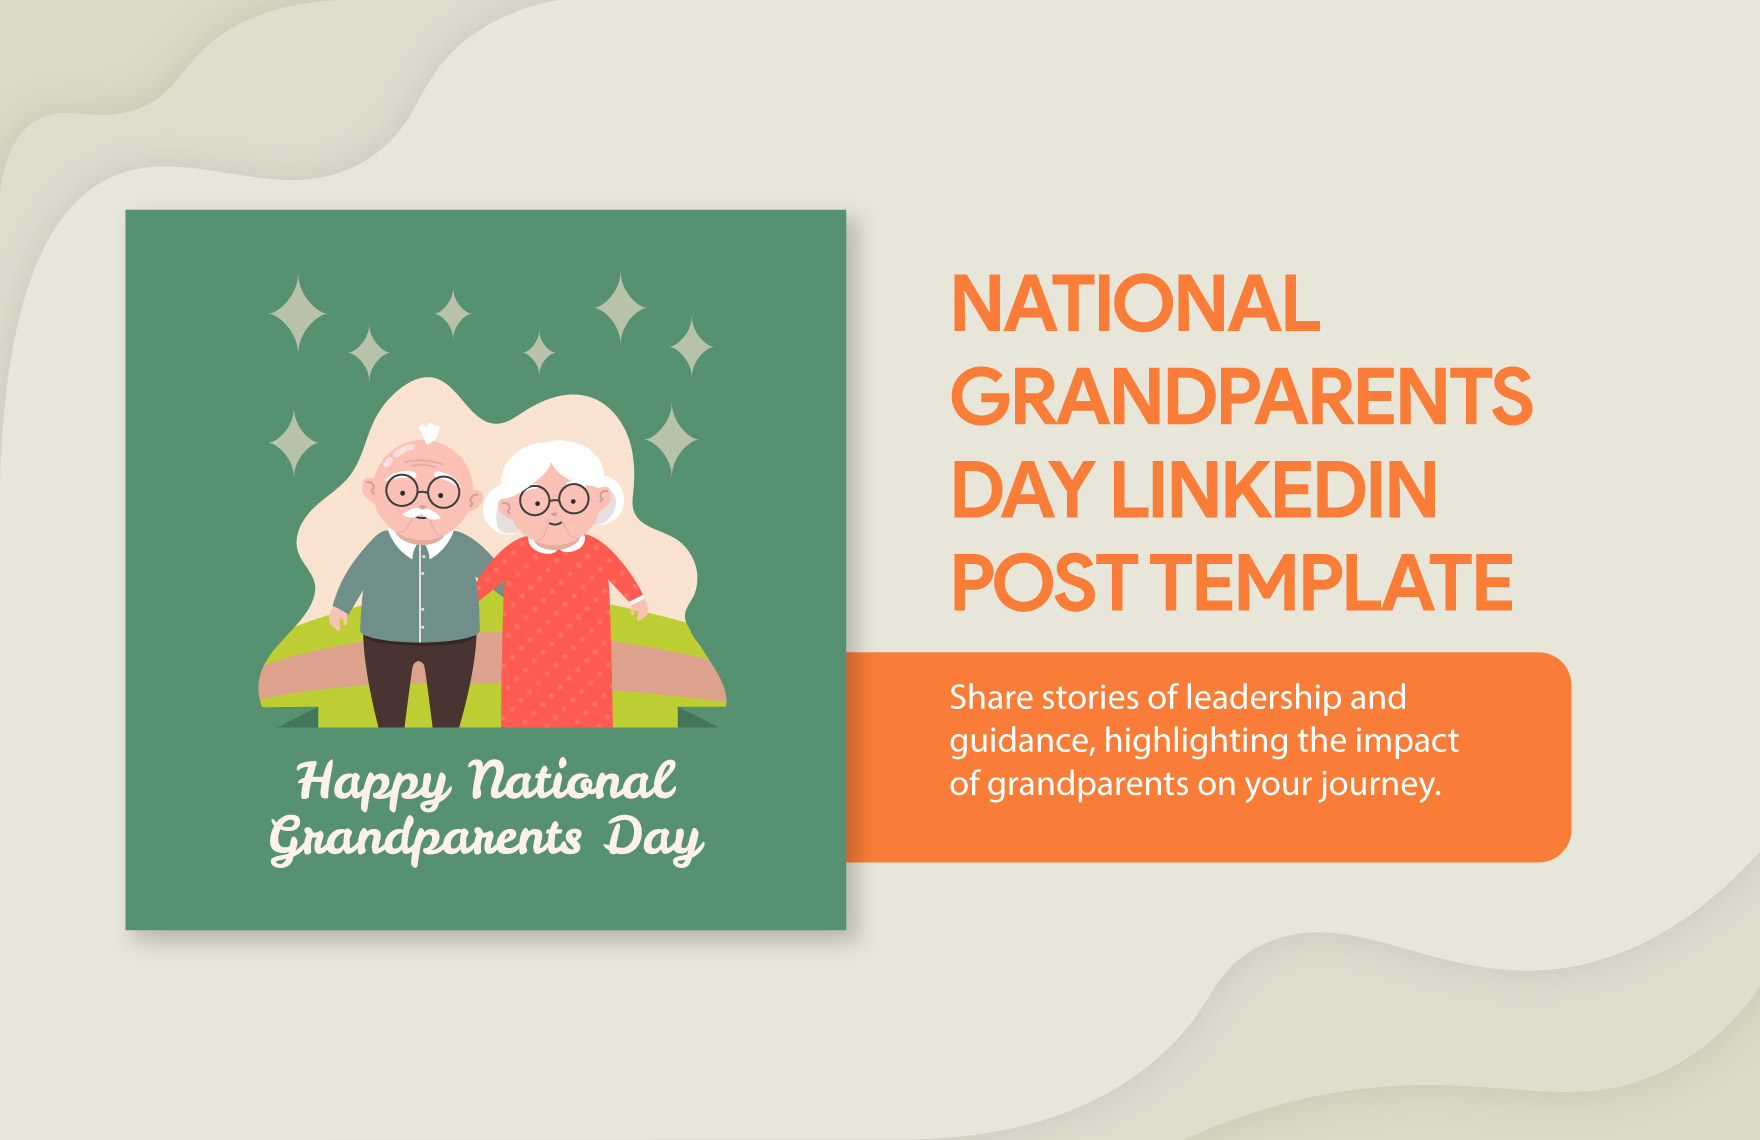 Free National Grandparents Day LinkedIn Post Template in Illustrator, PSD, PNG